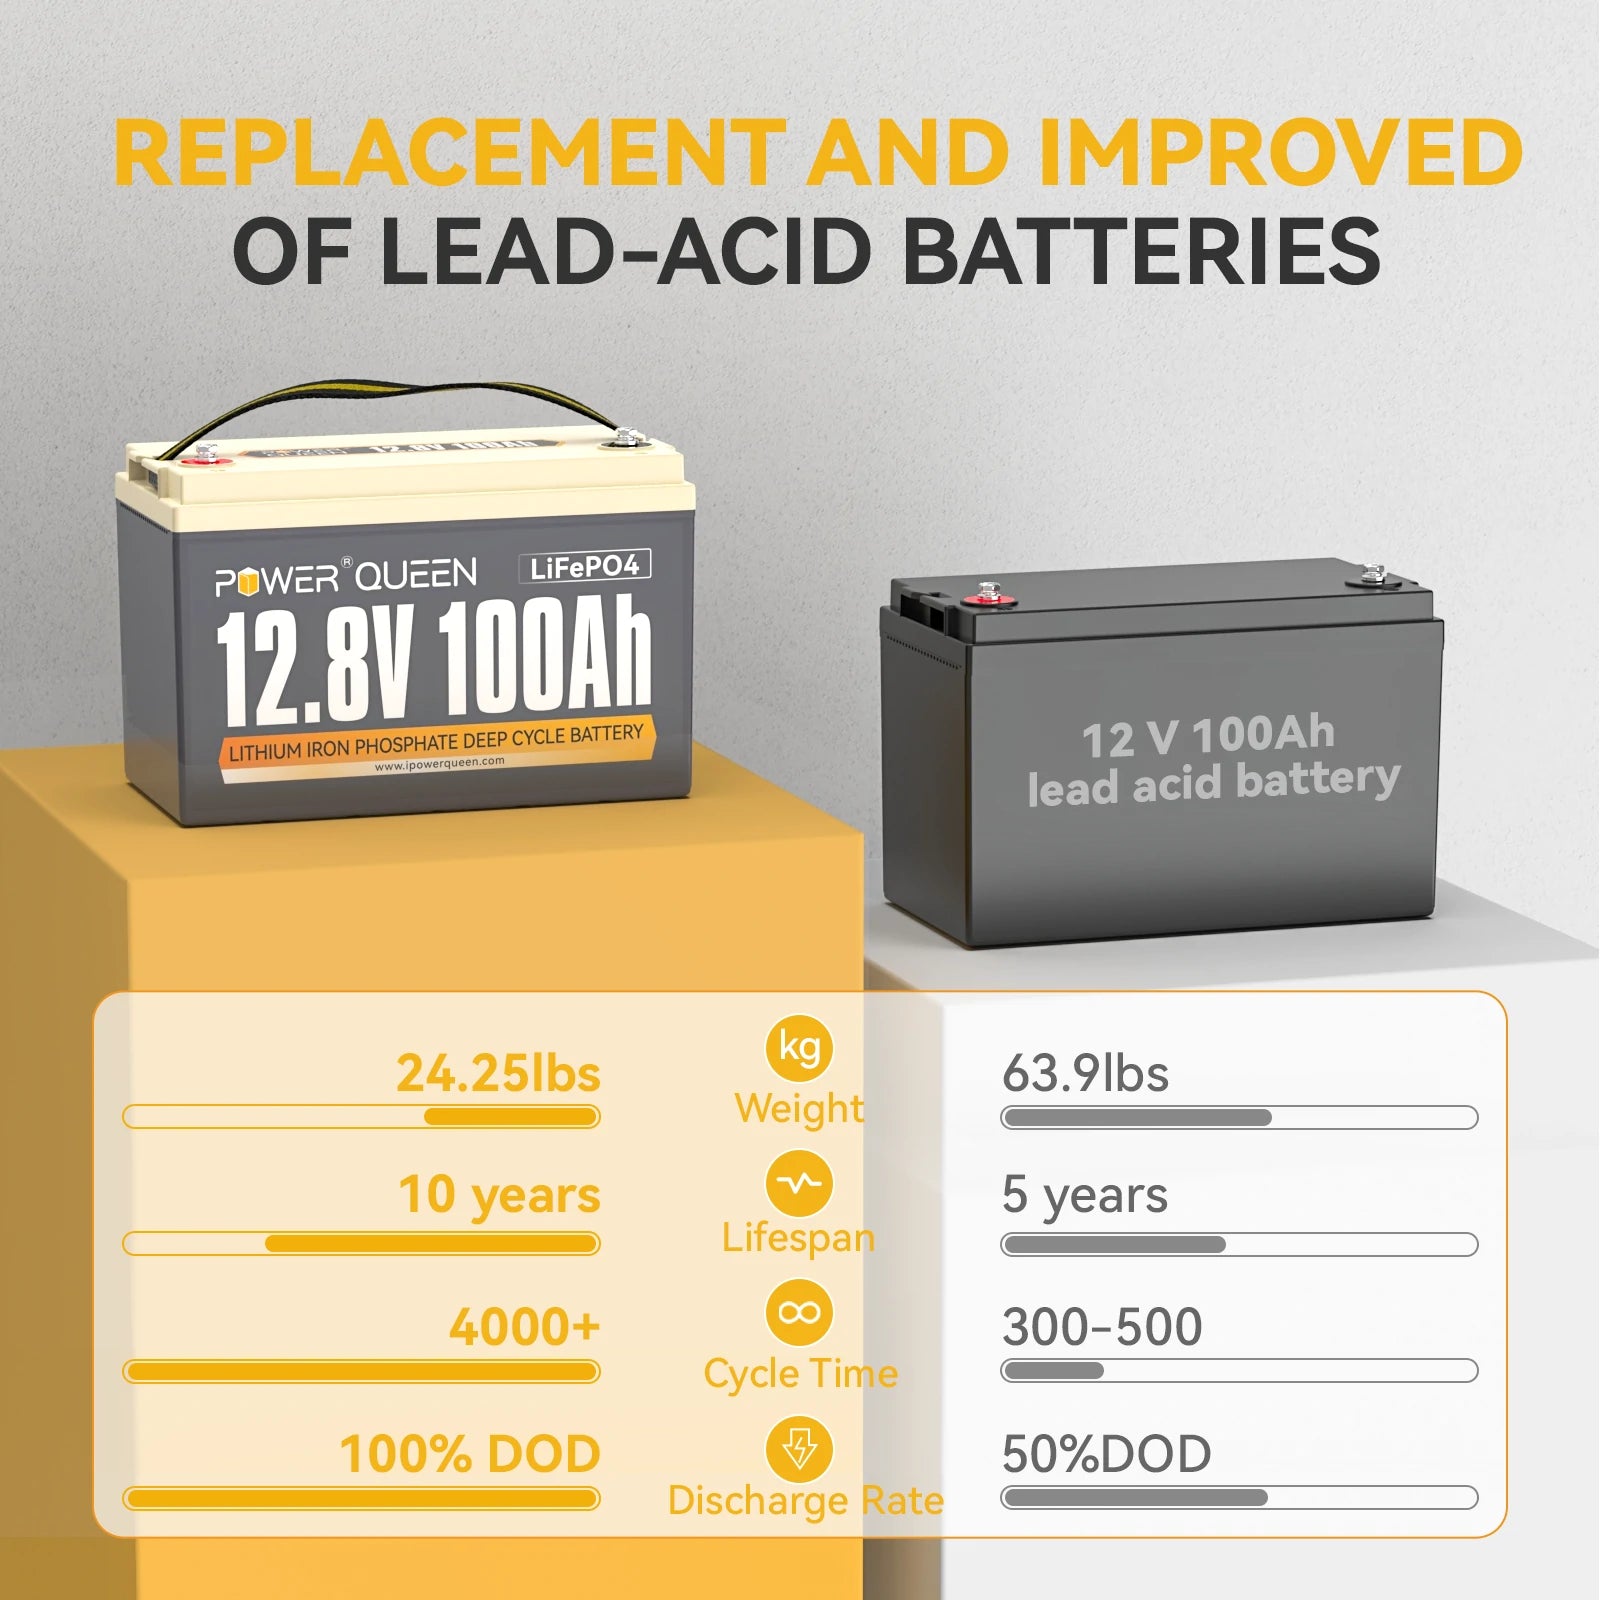  Power-Queen-12V-100Ah-LiFepo4-battery-compared-with-lead-acid-battery